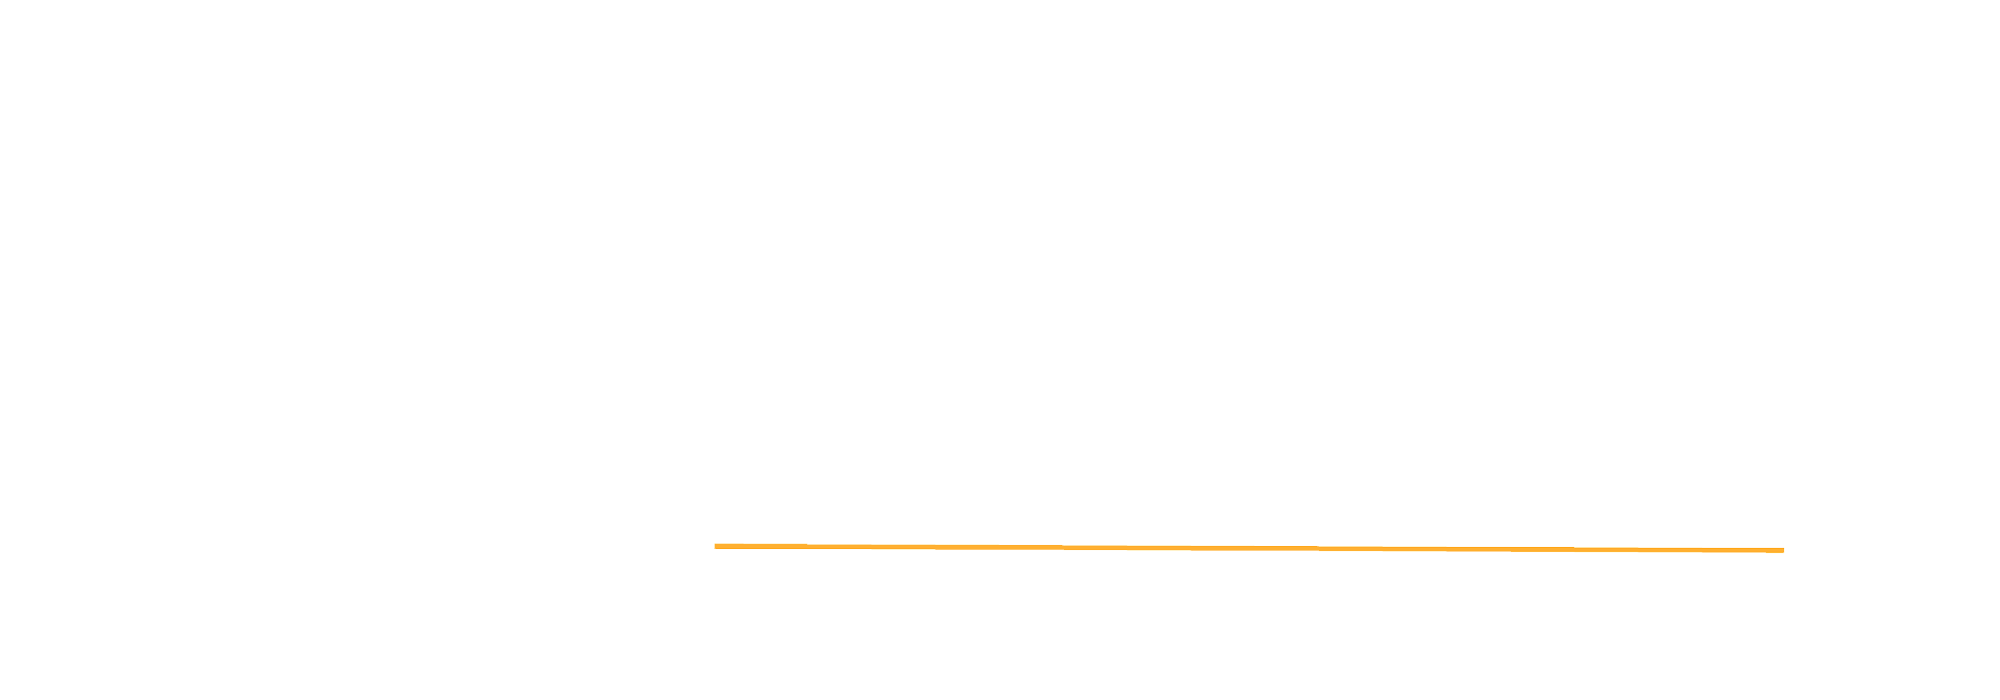 oxygen forensic suite 5 key